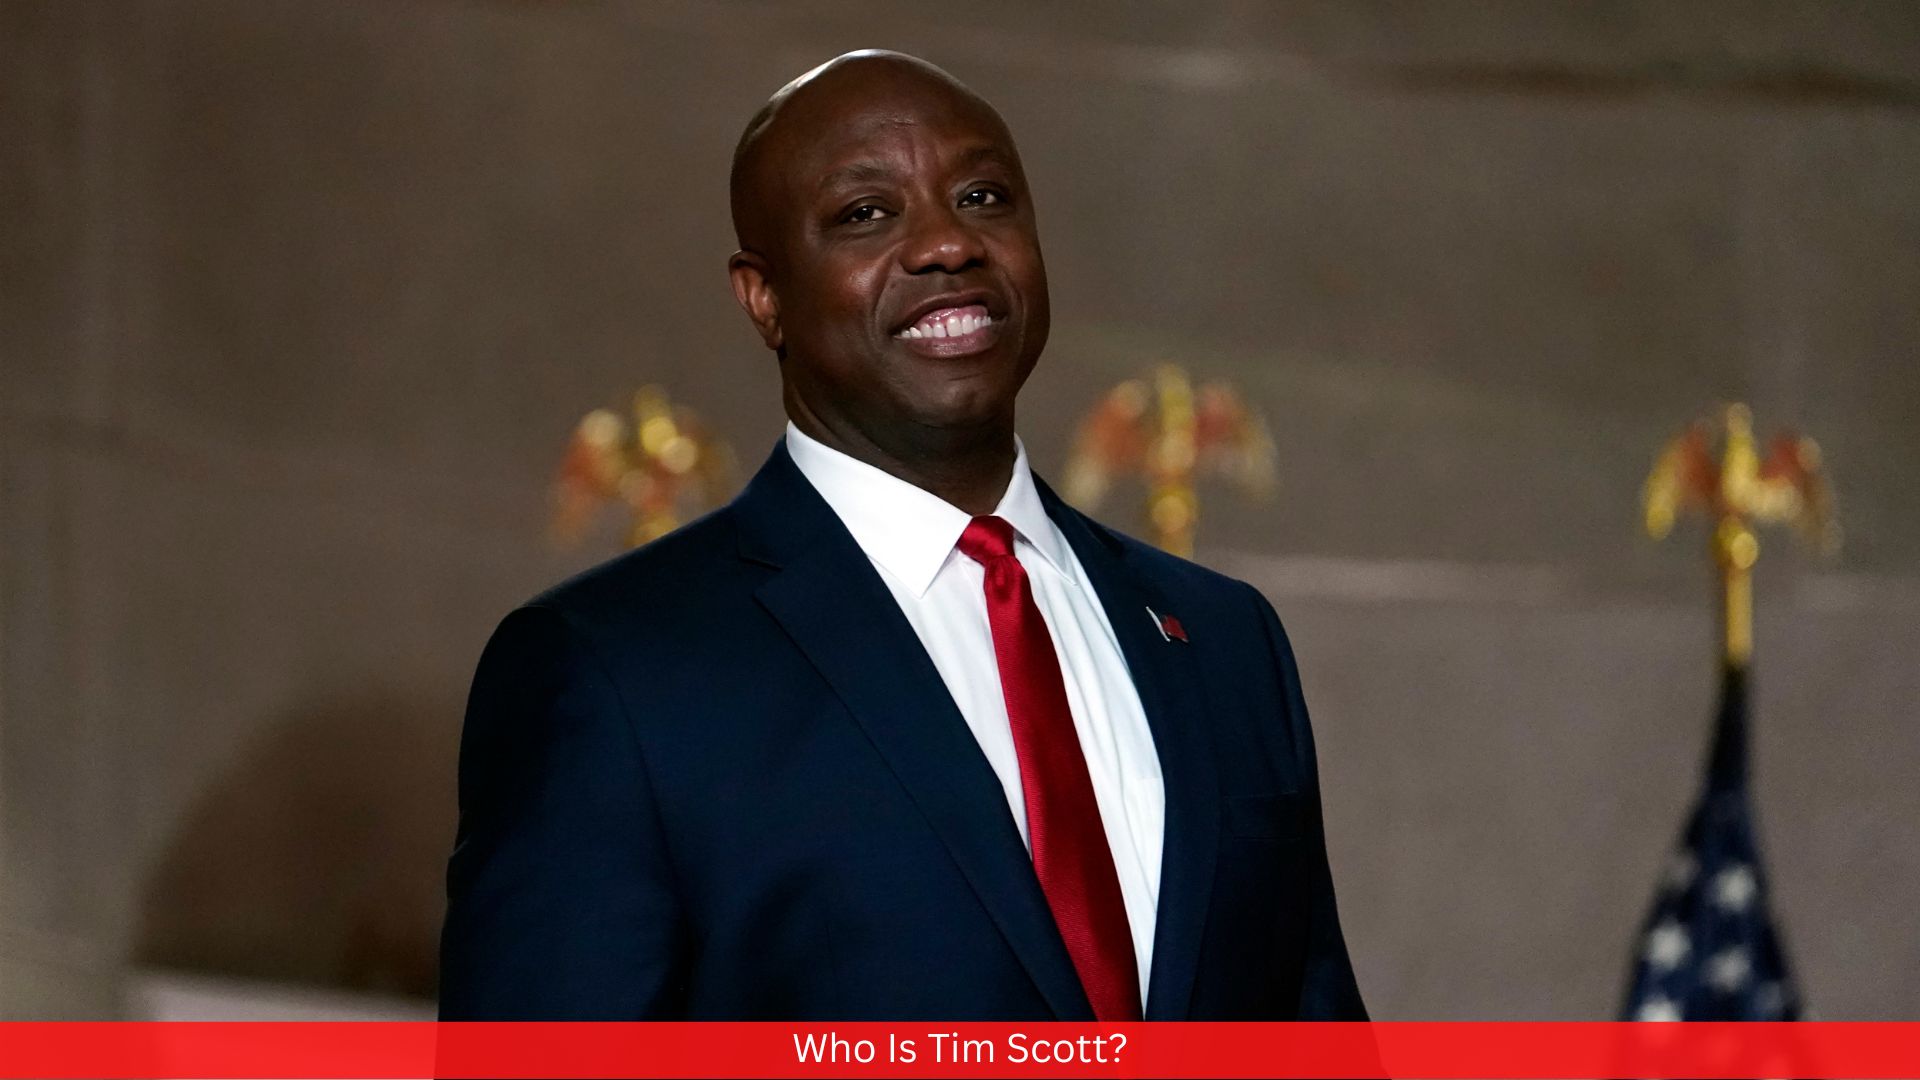 Who Is Tim Scott? Know All About His Personal & Professional Life!